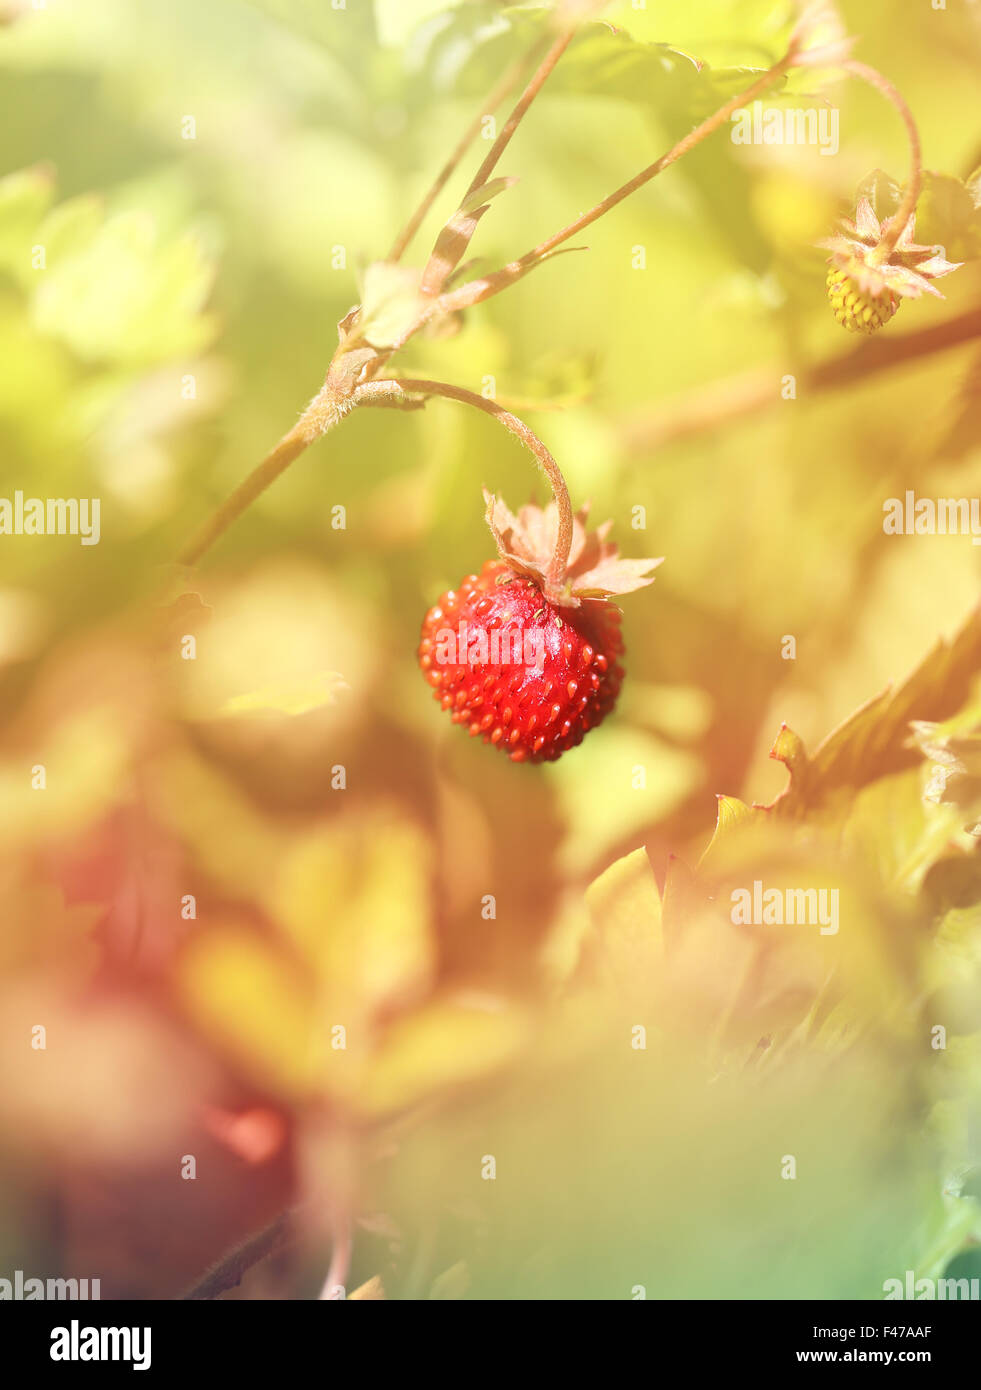 Delicious wild berry strawberry photographed close up Stock Photo